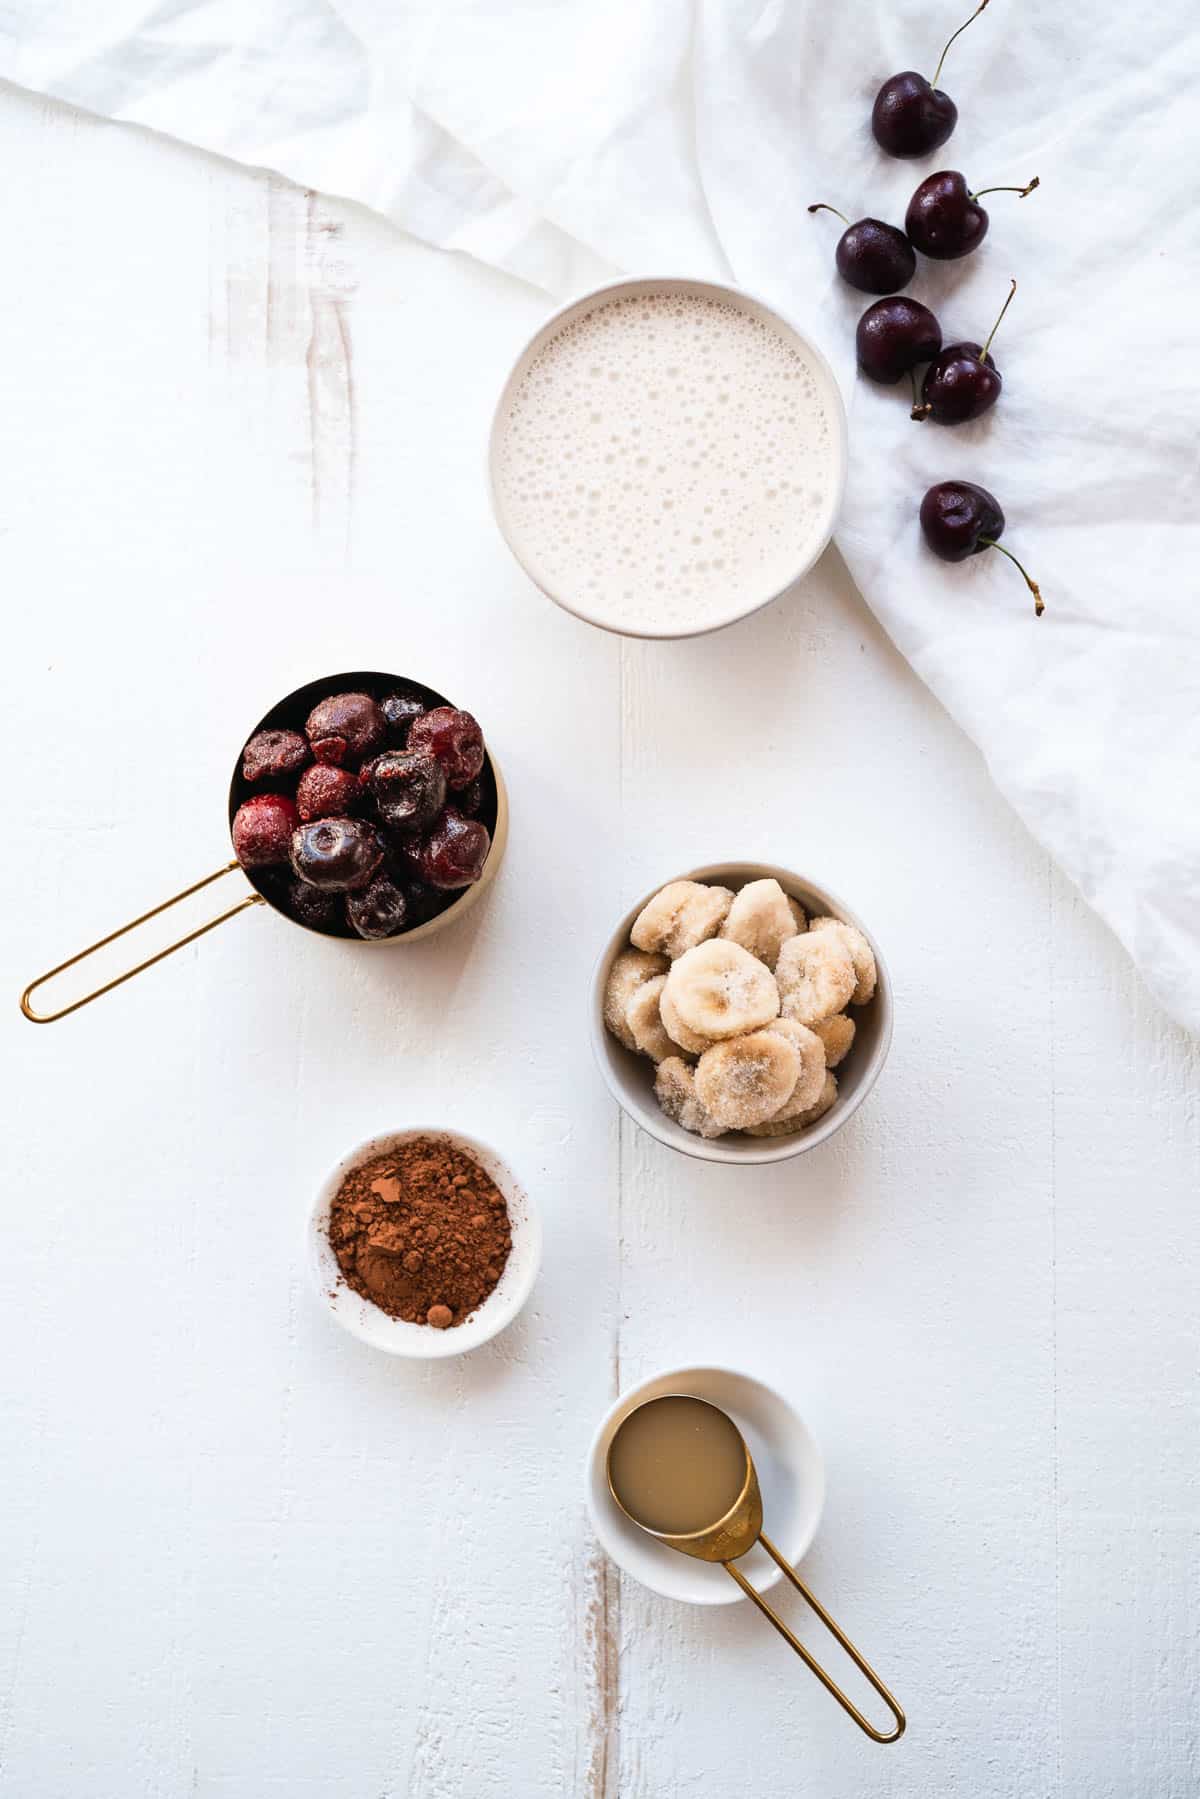 Ingredients for a chocolate cherry smoothie on a white table.